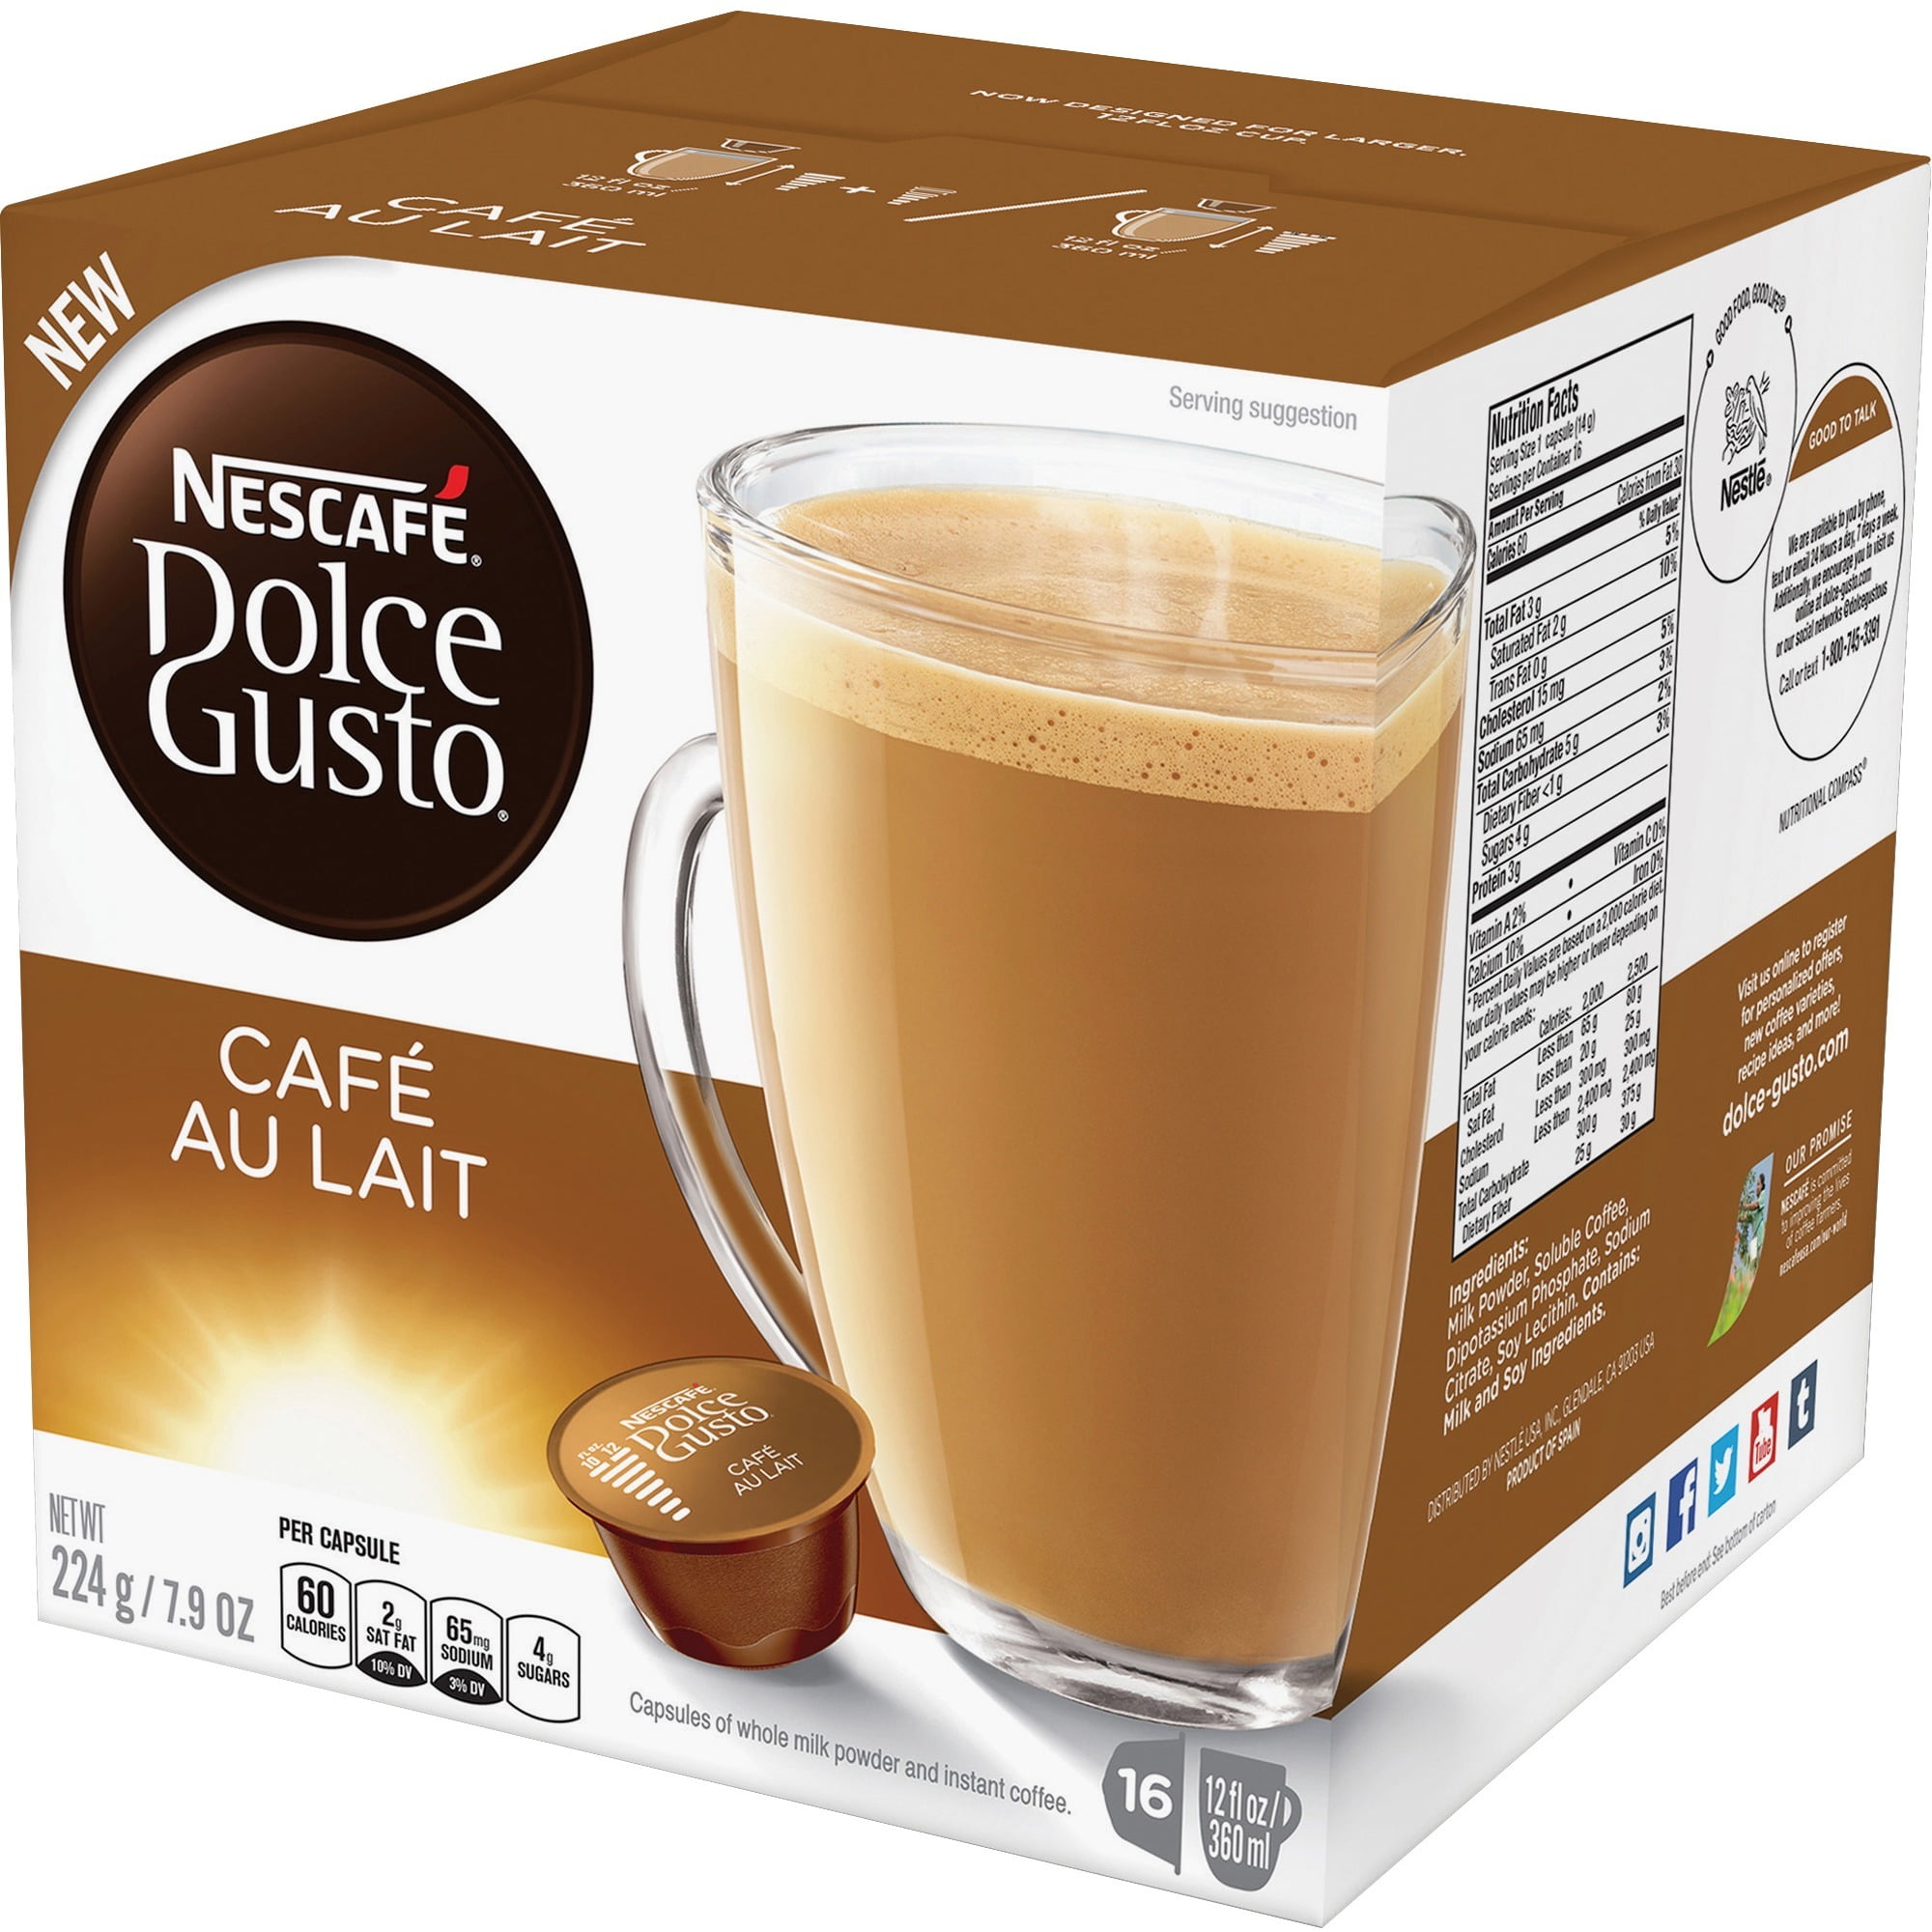  NESCAFE Dolce Gusto Caffe Lungo 3X16CAPS : Grocery & Gourmet  Food